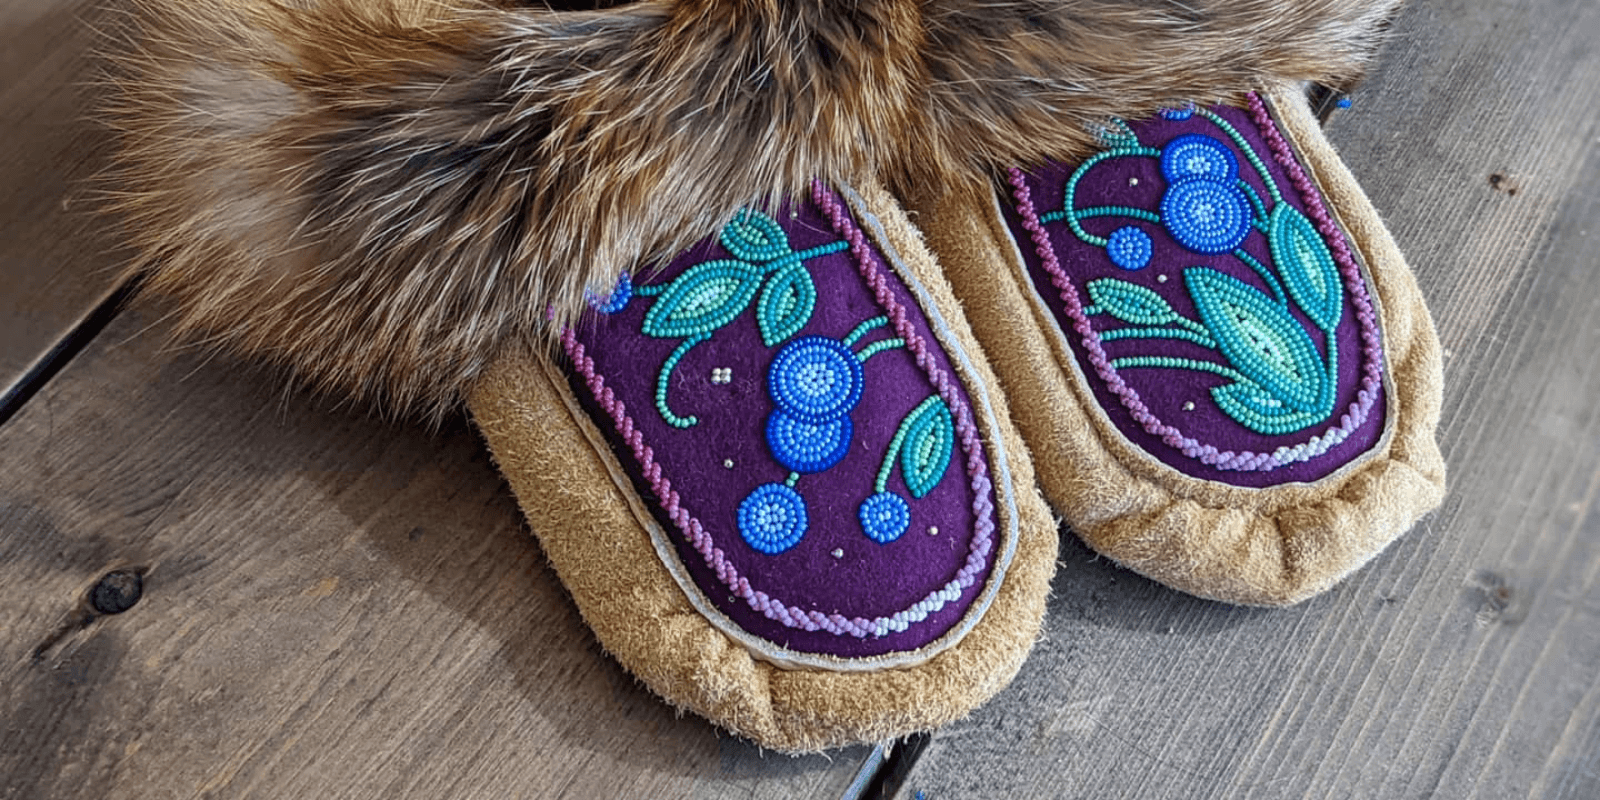 A pair of fur-lined moccasins adorned with green, blue and purple beads in a floral pattern